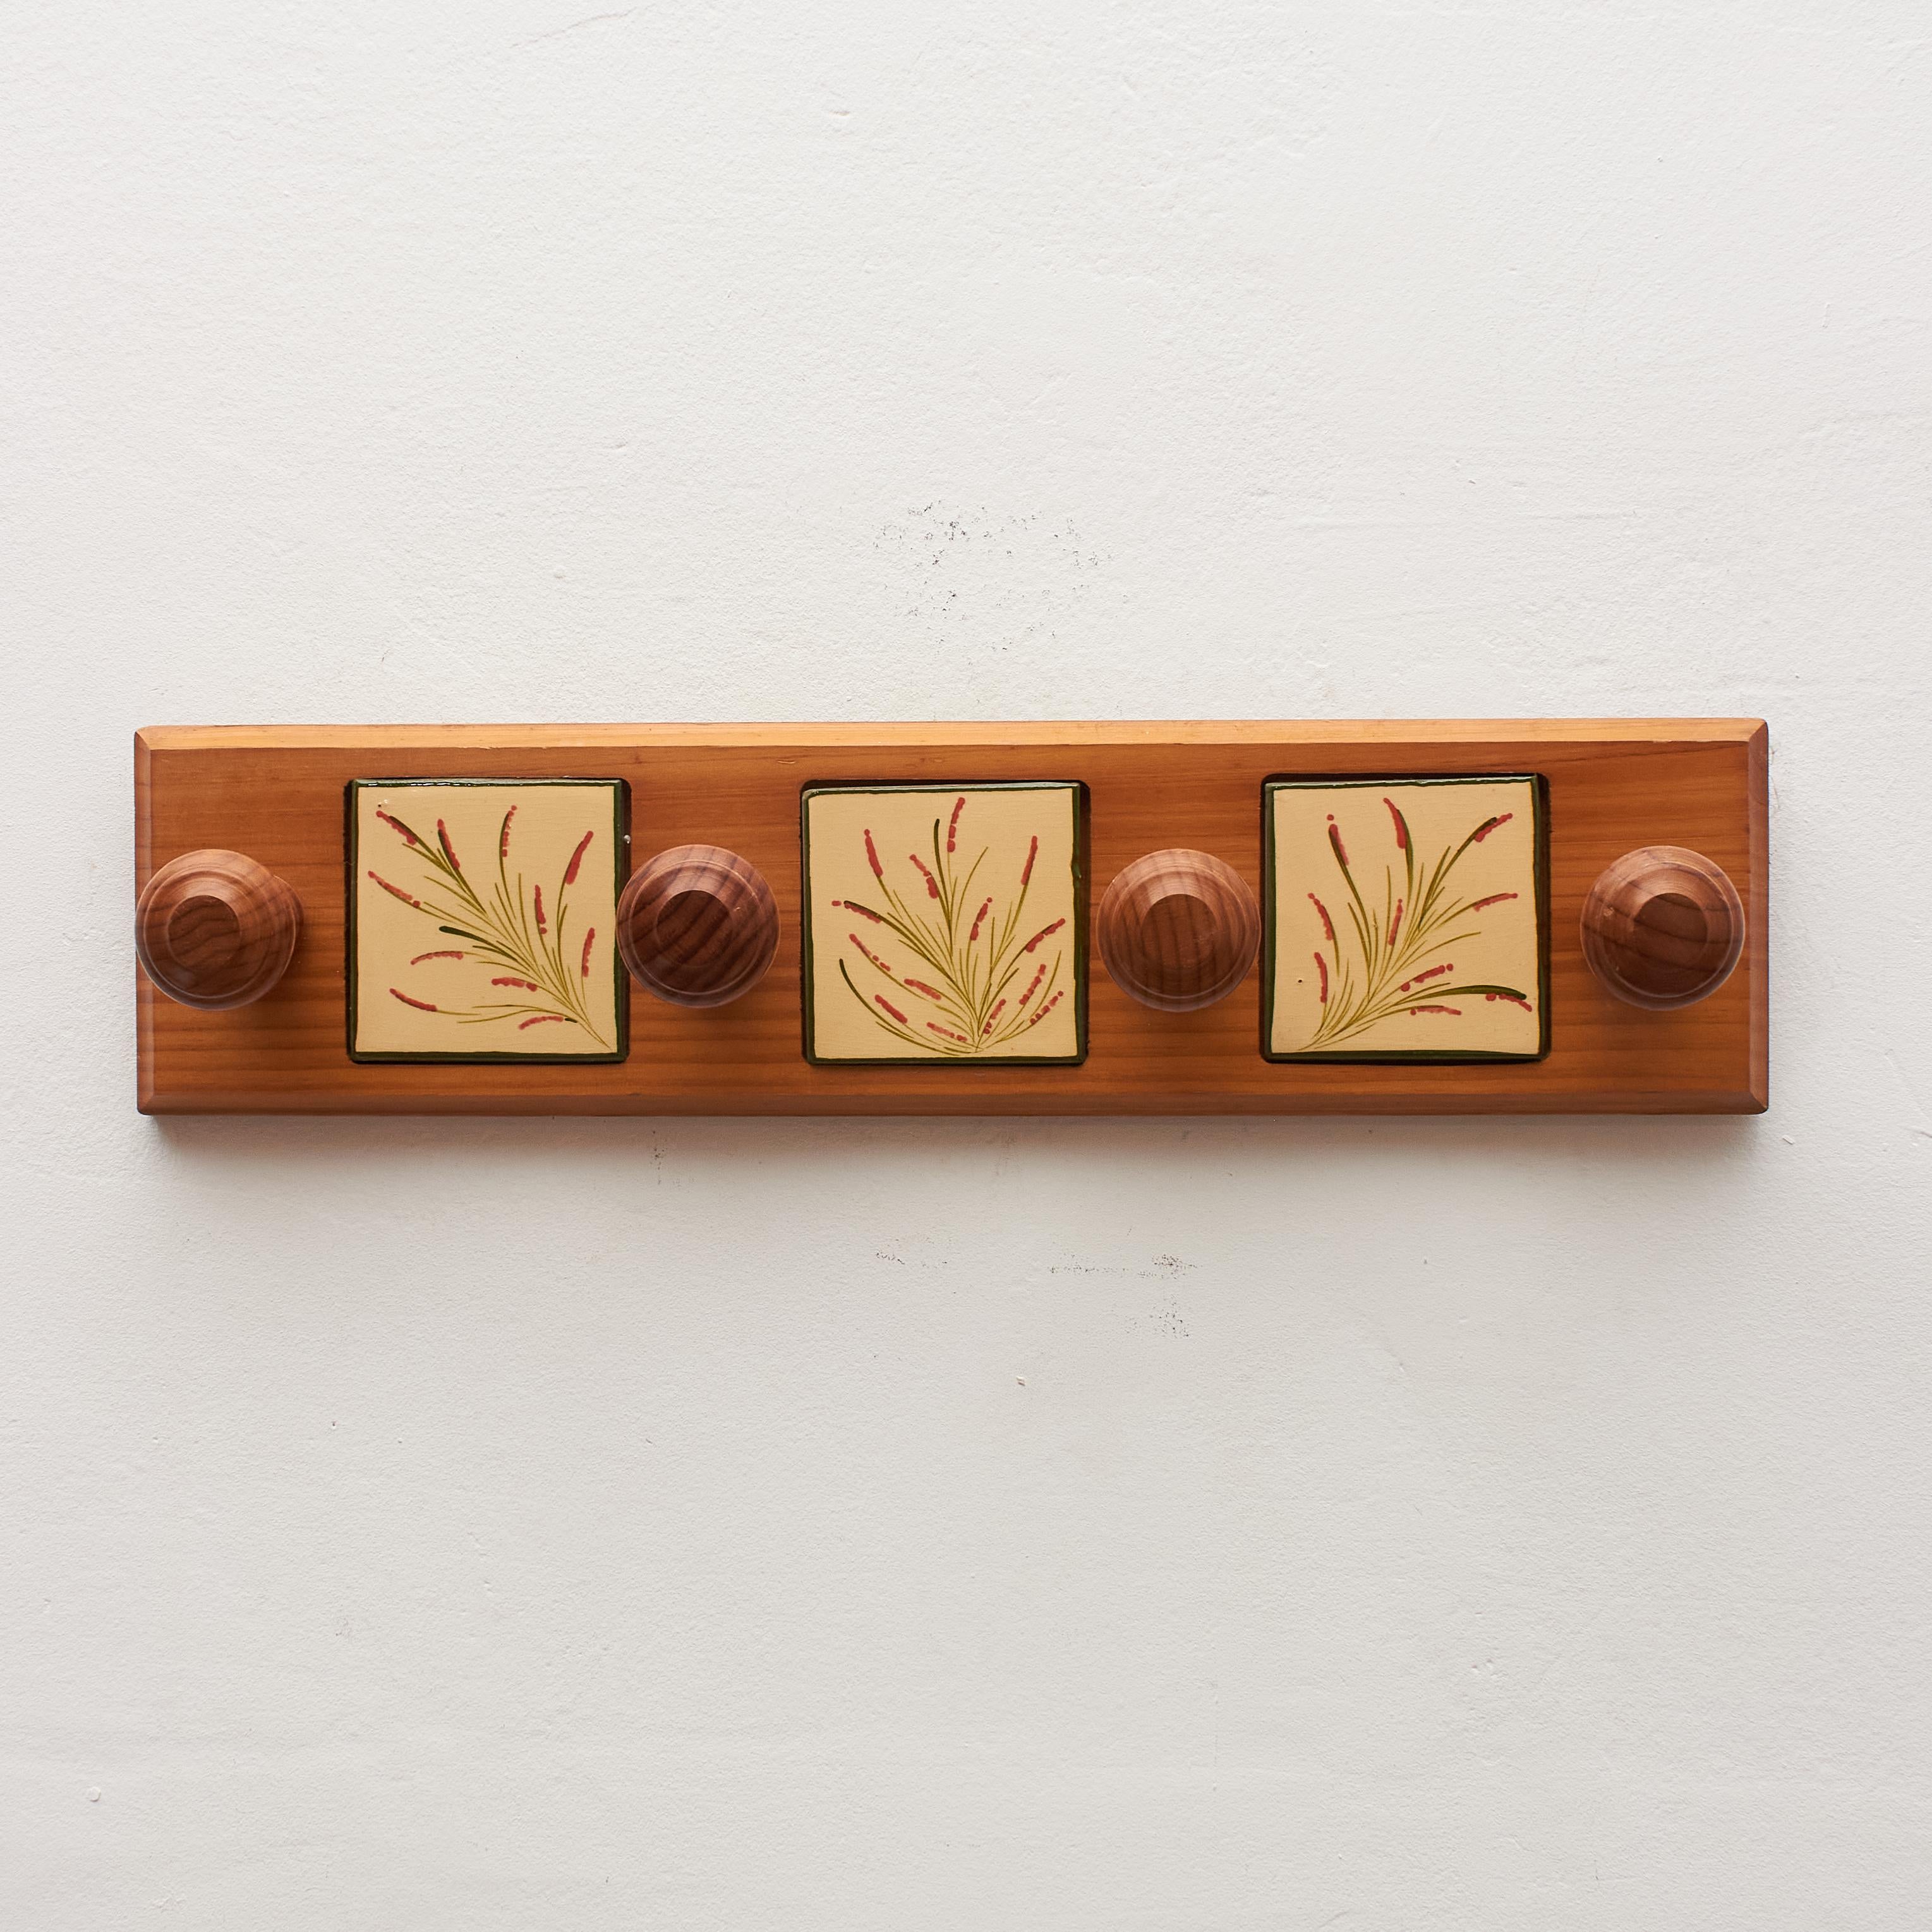 Elevate your space with the timeless craftsmanship of Catalan artist Diaz Costa through our vintage hand-painted ceramic and wood hanger, crafted around 1960 in Spain. This traditional piece is a testament to Diaz Costa's artistic flair, blending